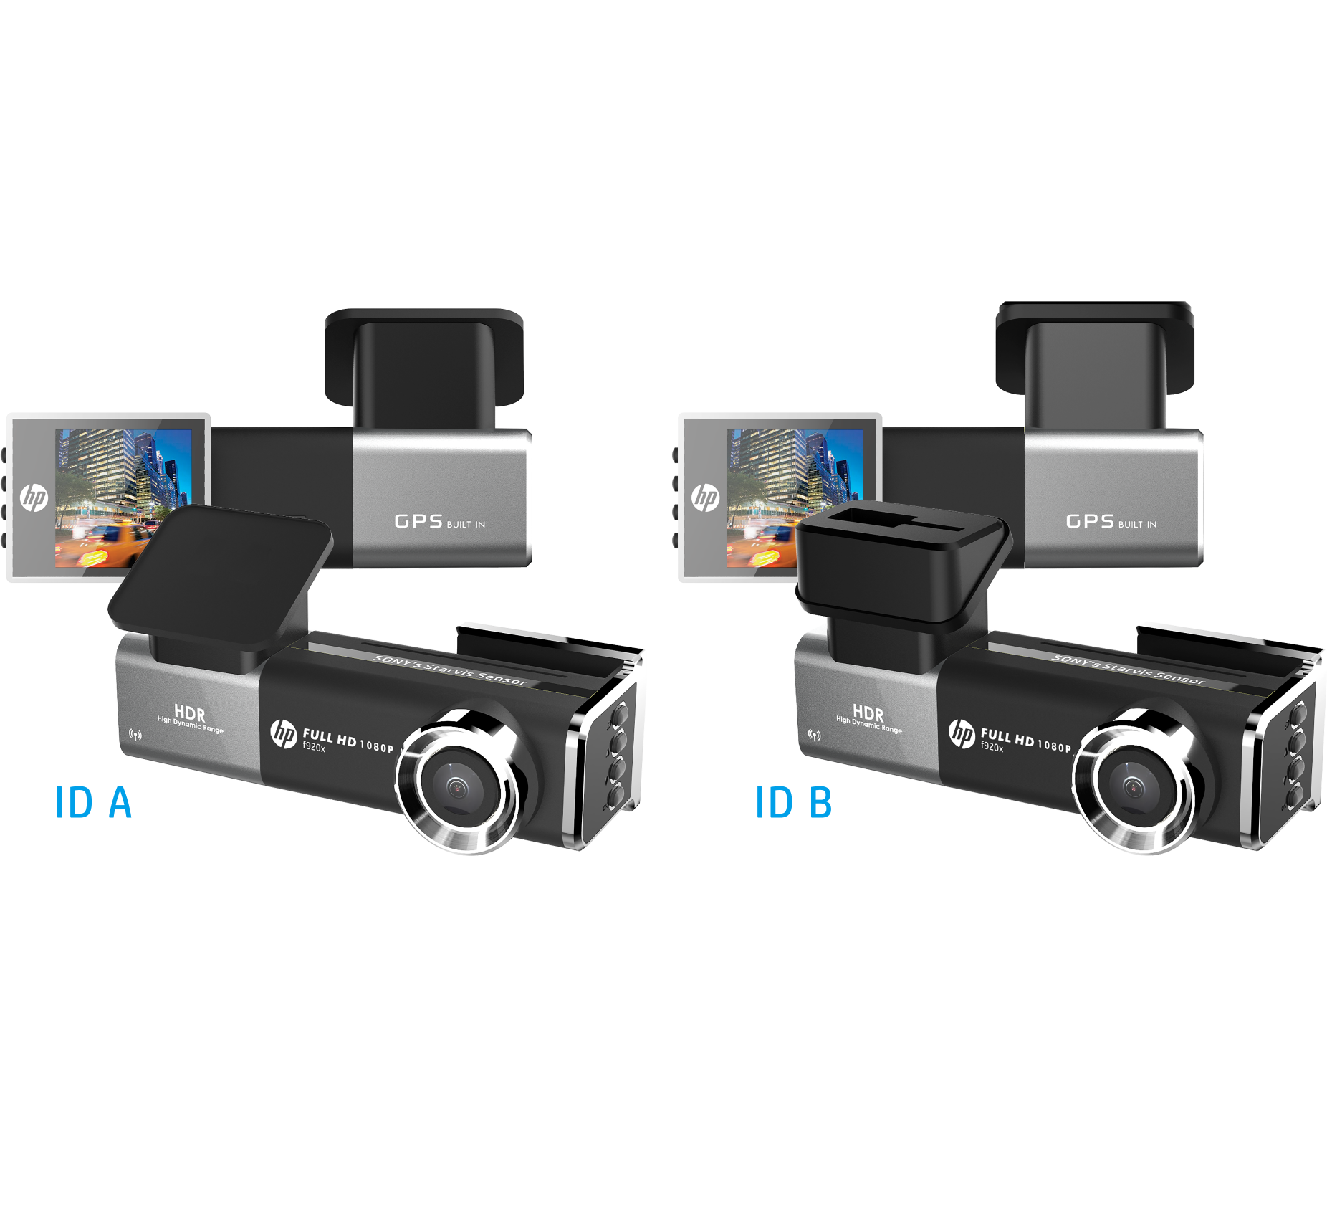 f910g - 9 Series - Car Camcorder - HP Image Solution